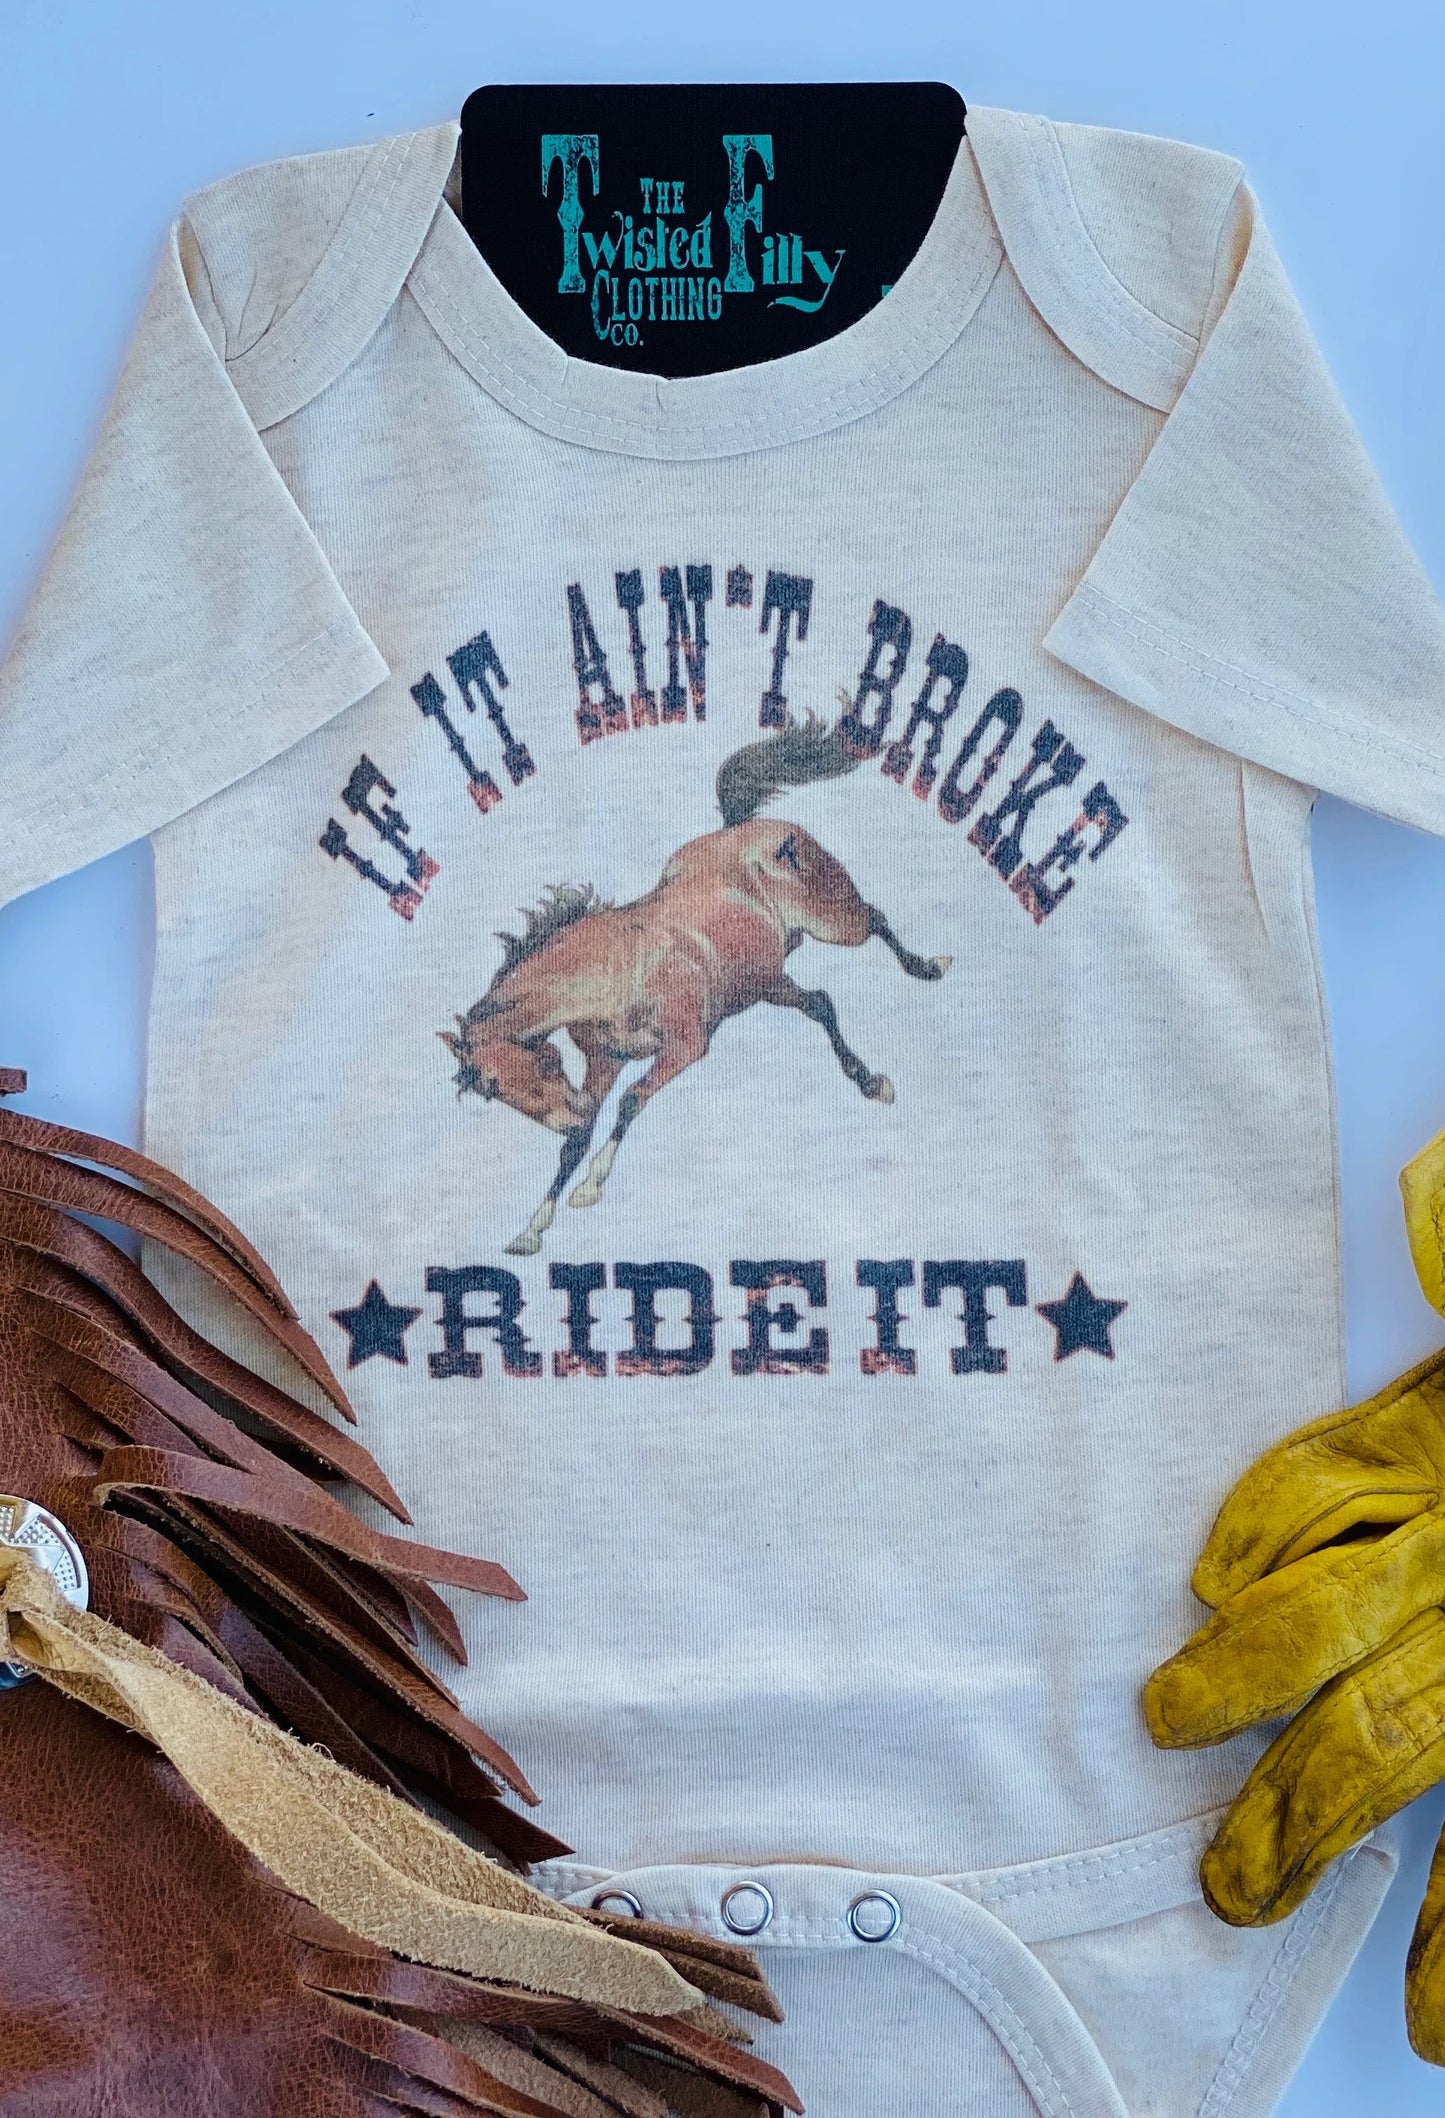 THE TWISTED FILLY CLOTHING CO. If It Ain't Broke Ride It - S/S Infant One Piece - Oatmeal